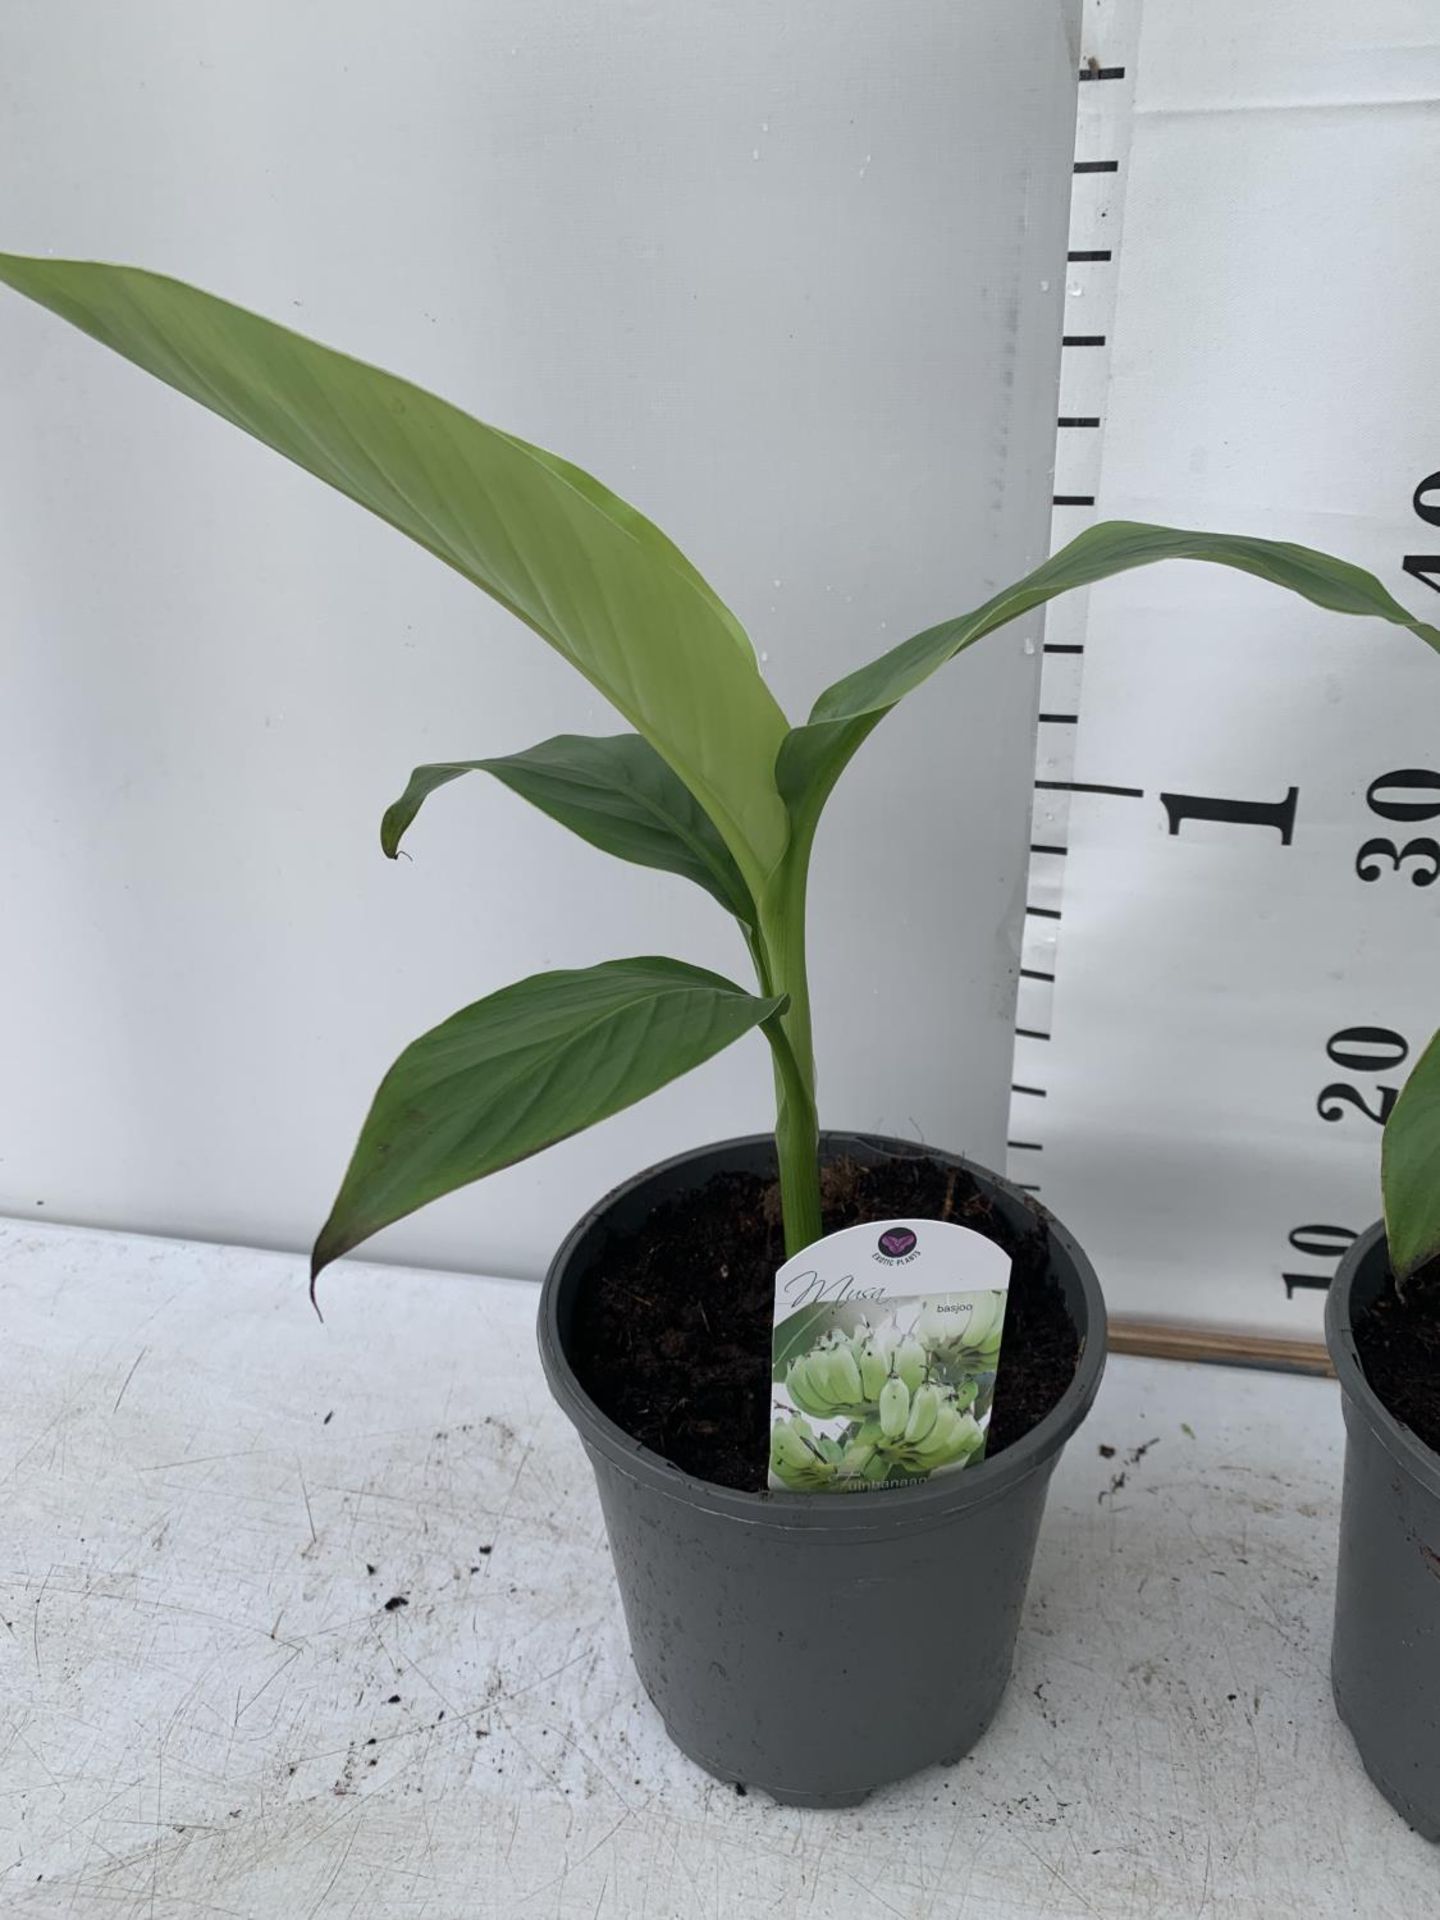 TWO MUSA BASJOO BANANA PLANTS IN 2 LTR POTS 40CM TALL TO BE SOLD FOR THE TWO NO VAT - Image 2 of 5